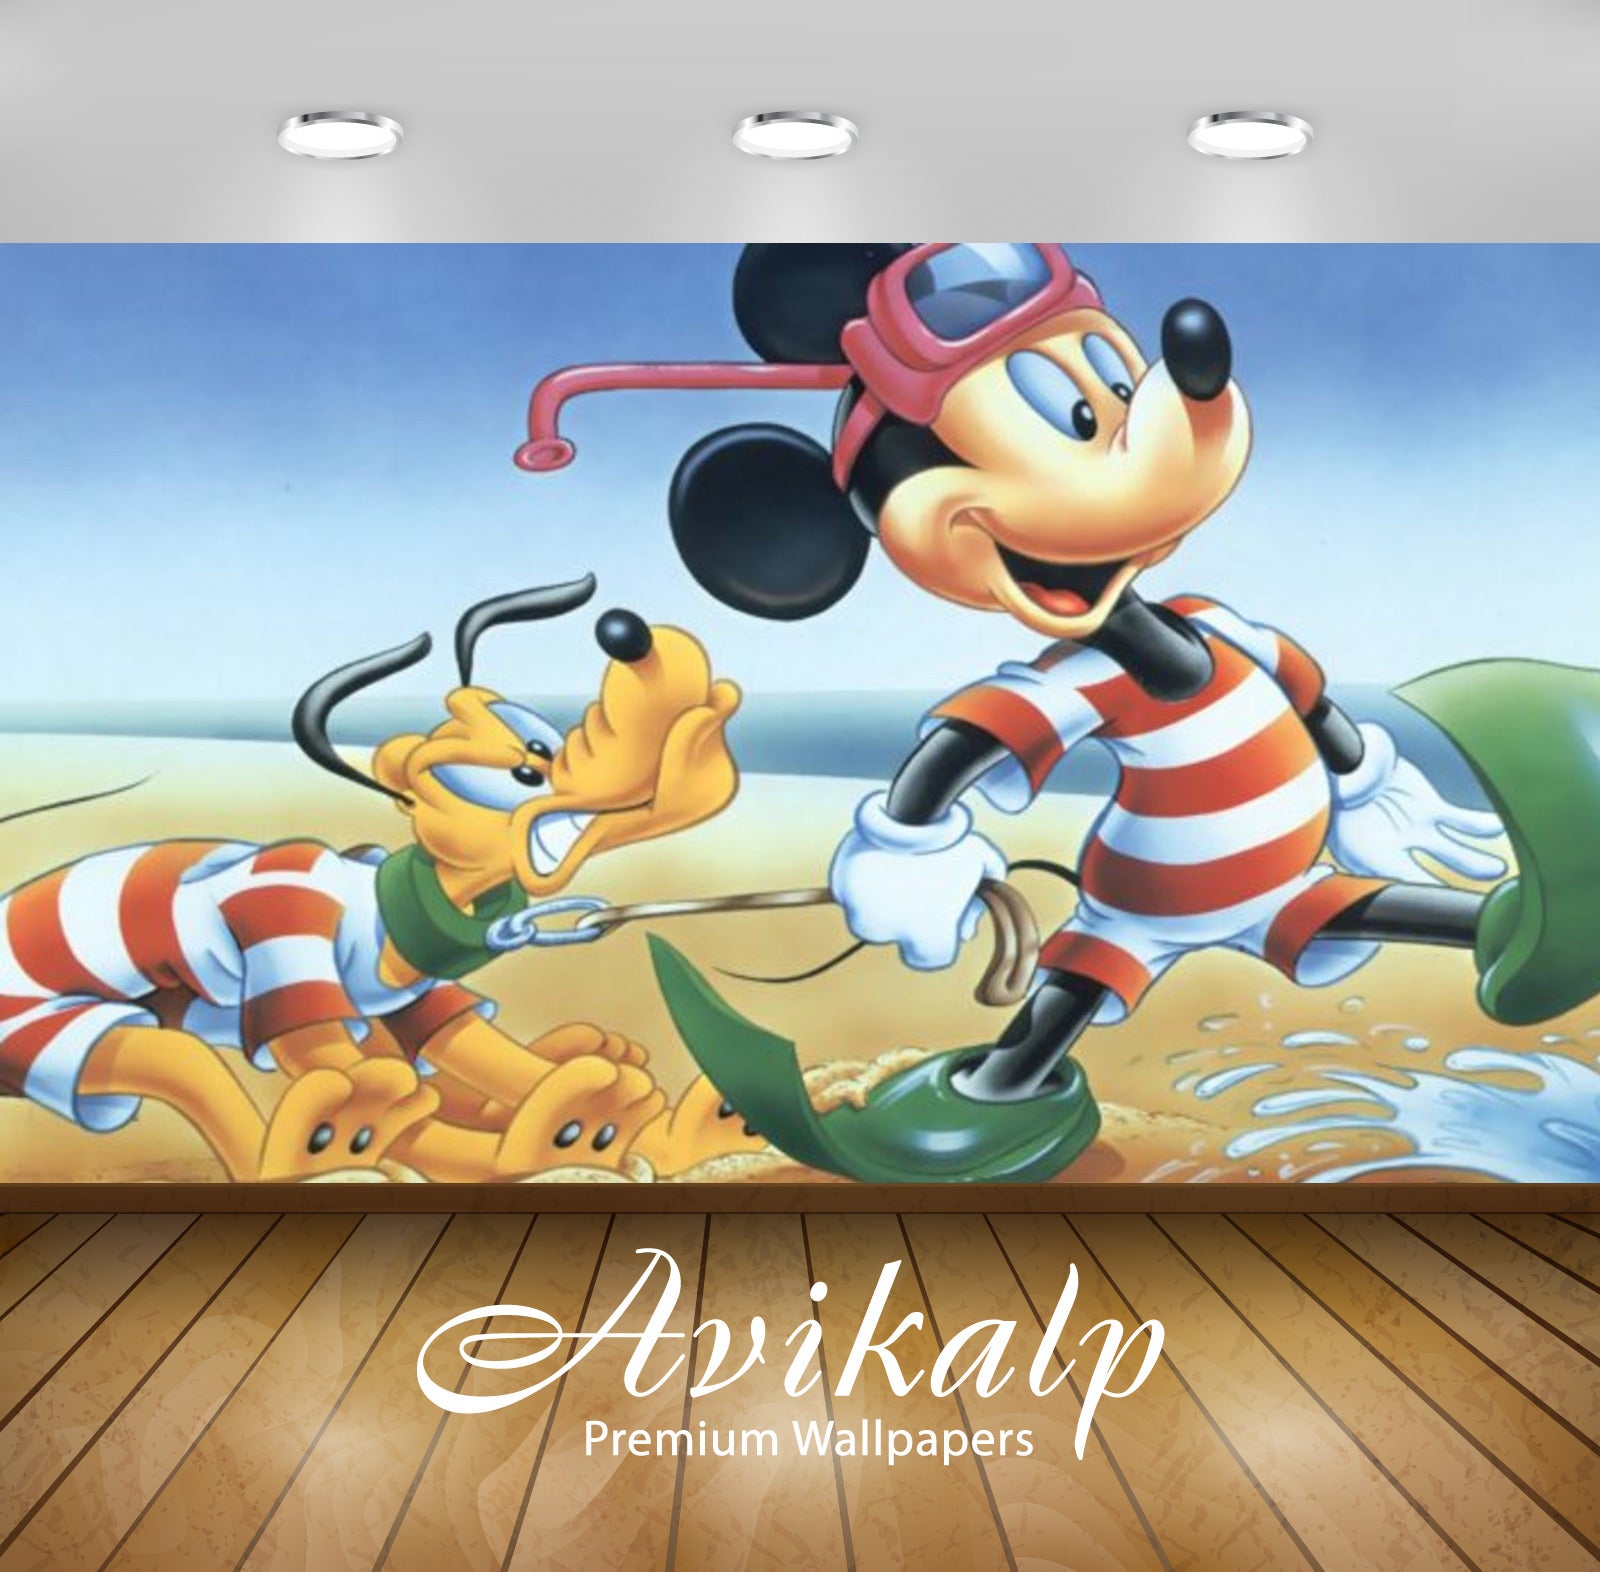 Avikalp Exclusive Awi2061 Disney Mickey Mouse And Pluto Disney Characters Sea Beach Bathing  Full HD